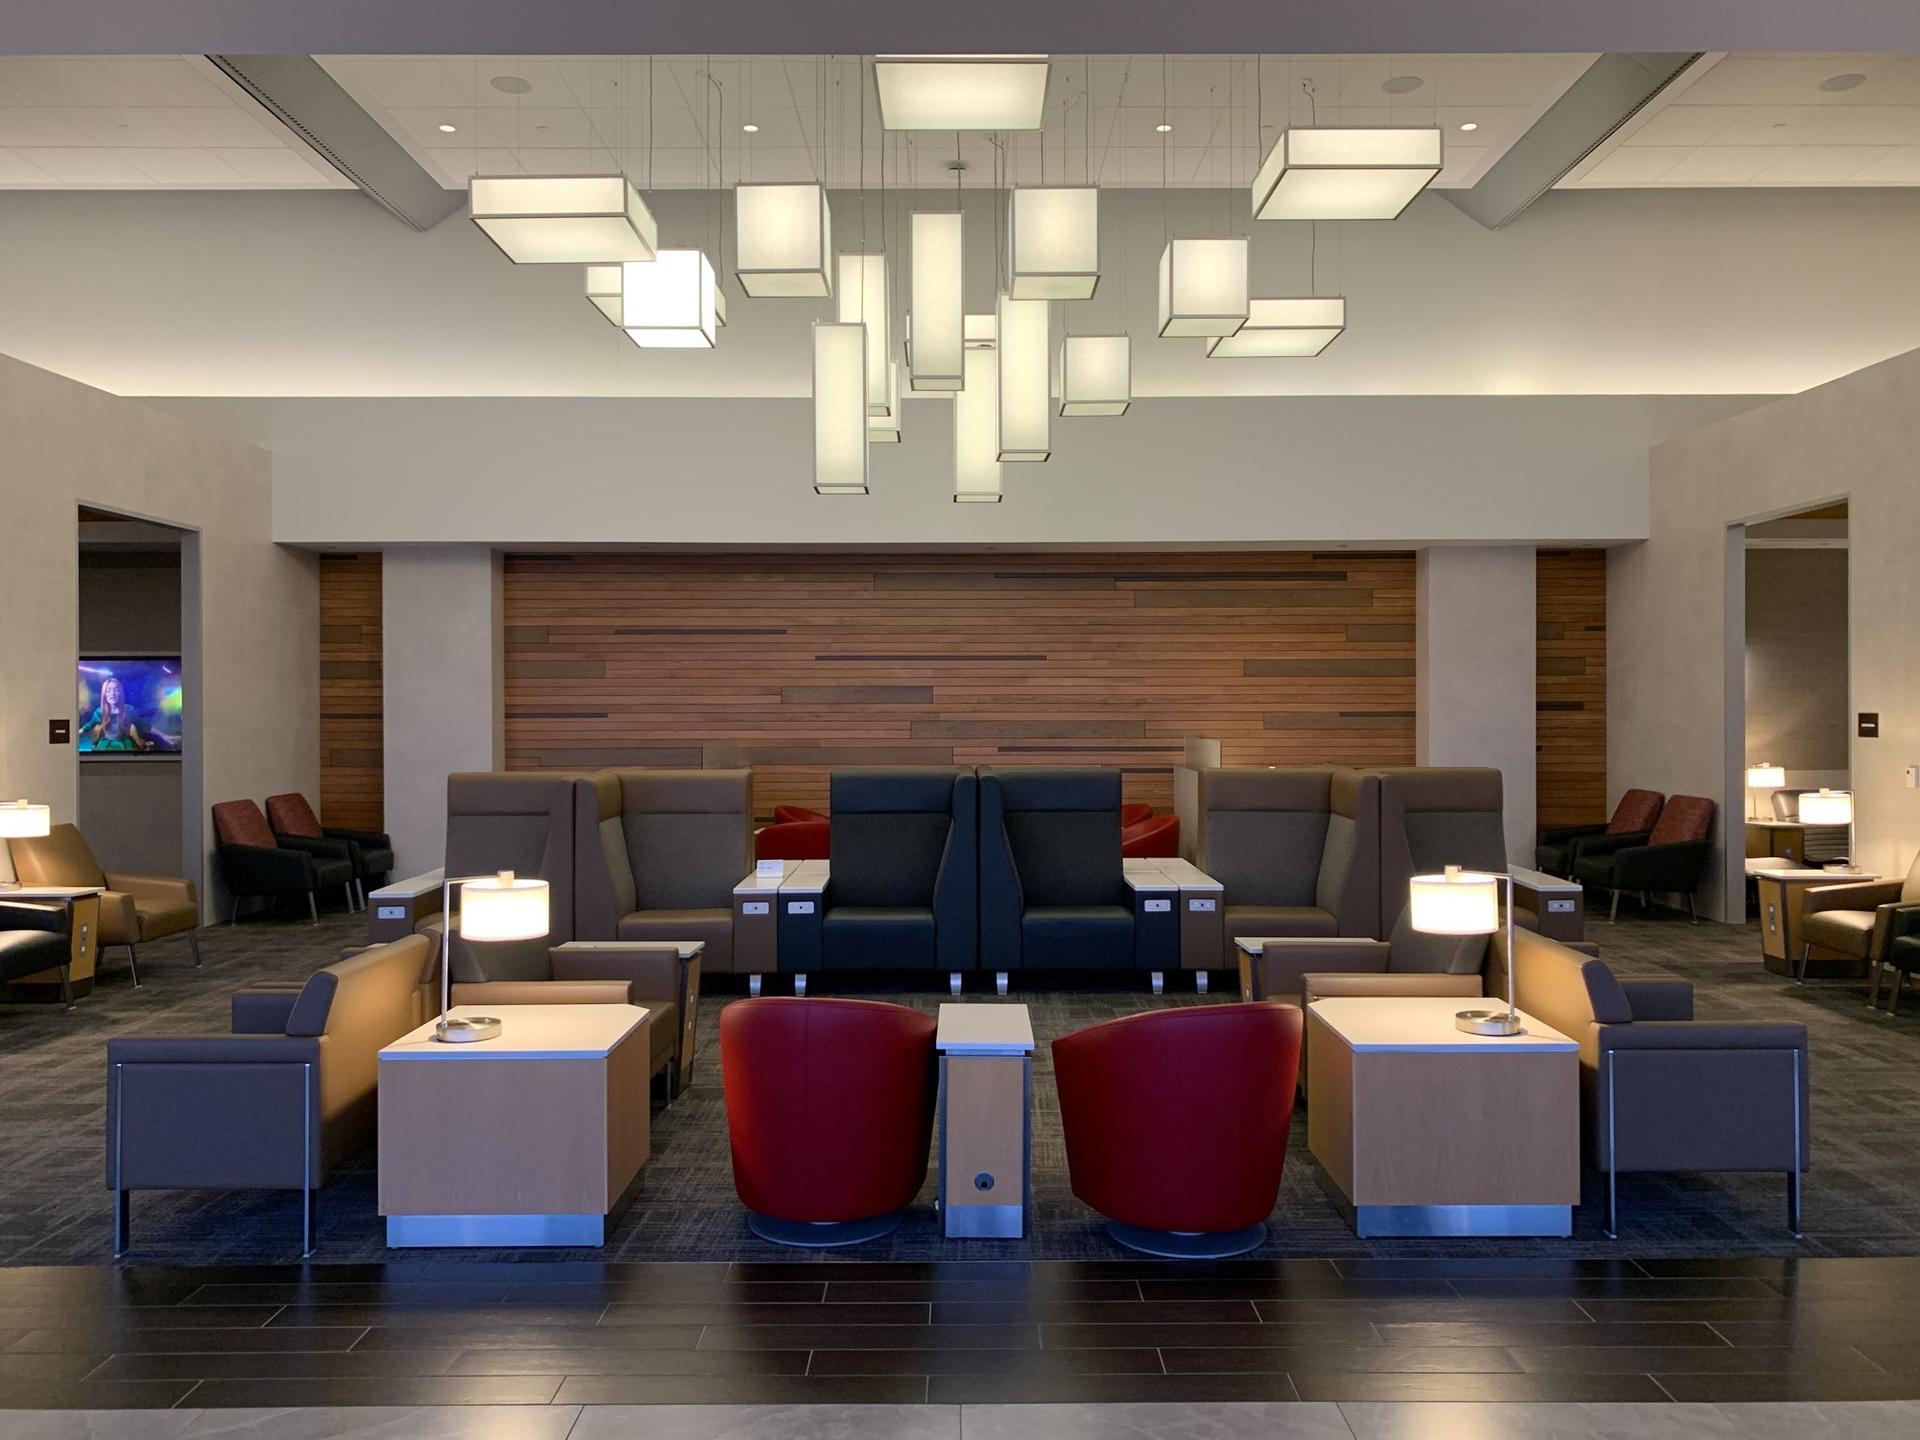 American Airlines Flagship Lounge image 41 of 55